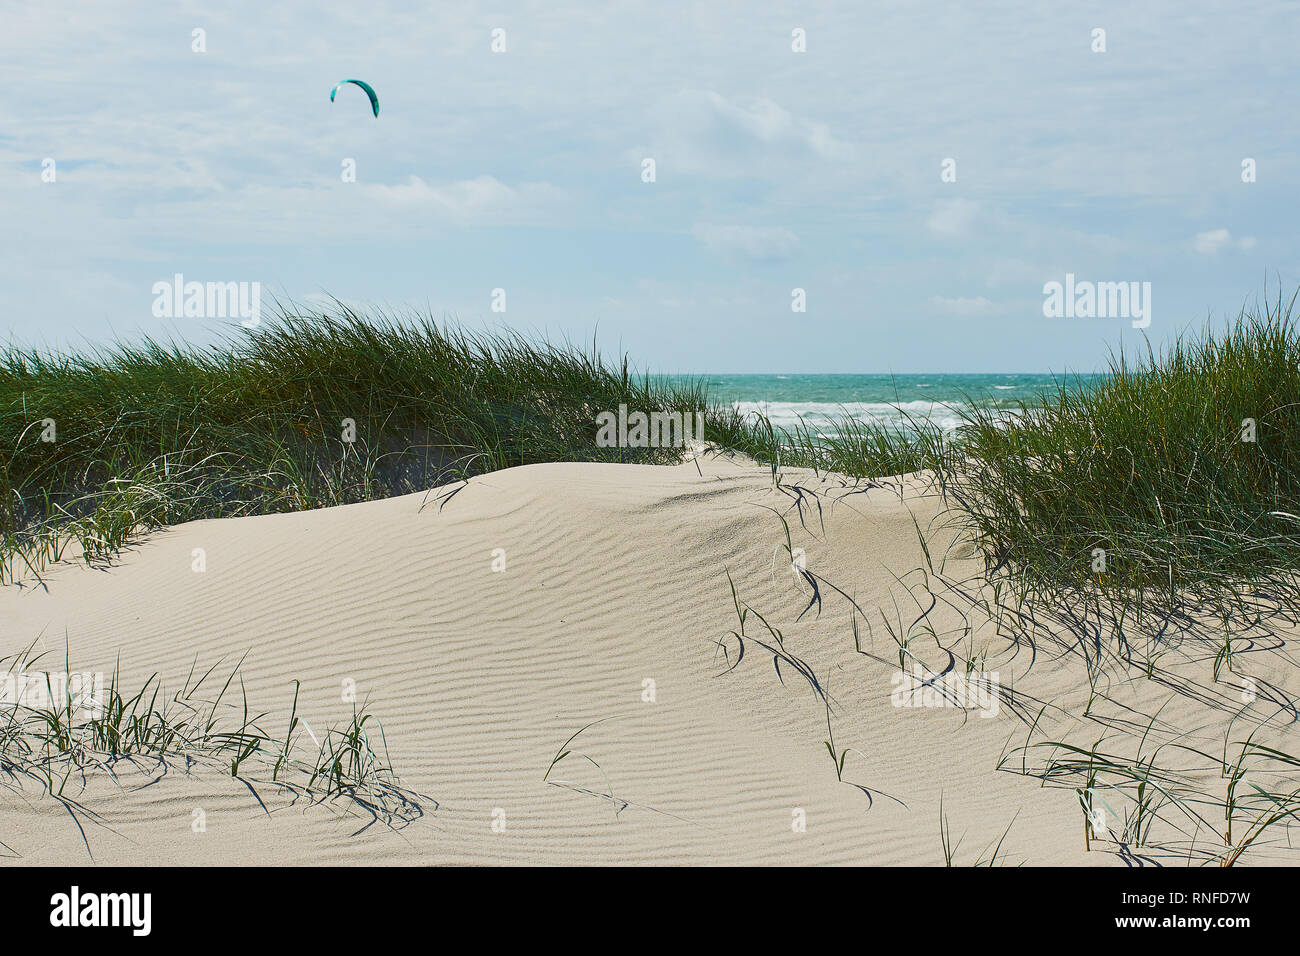 view through the marram grass and the dunes to the North Sea in Petten, North Netherlands Stock Photo